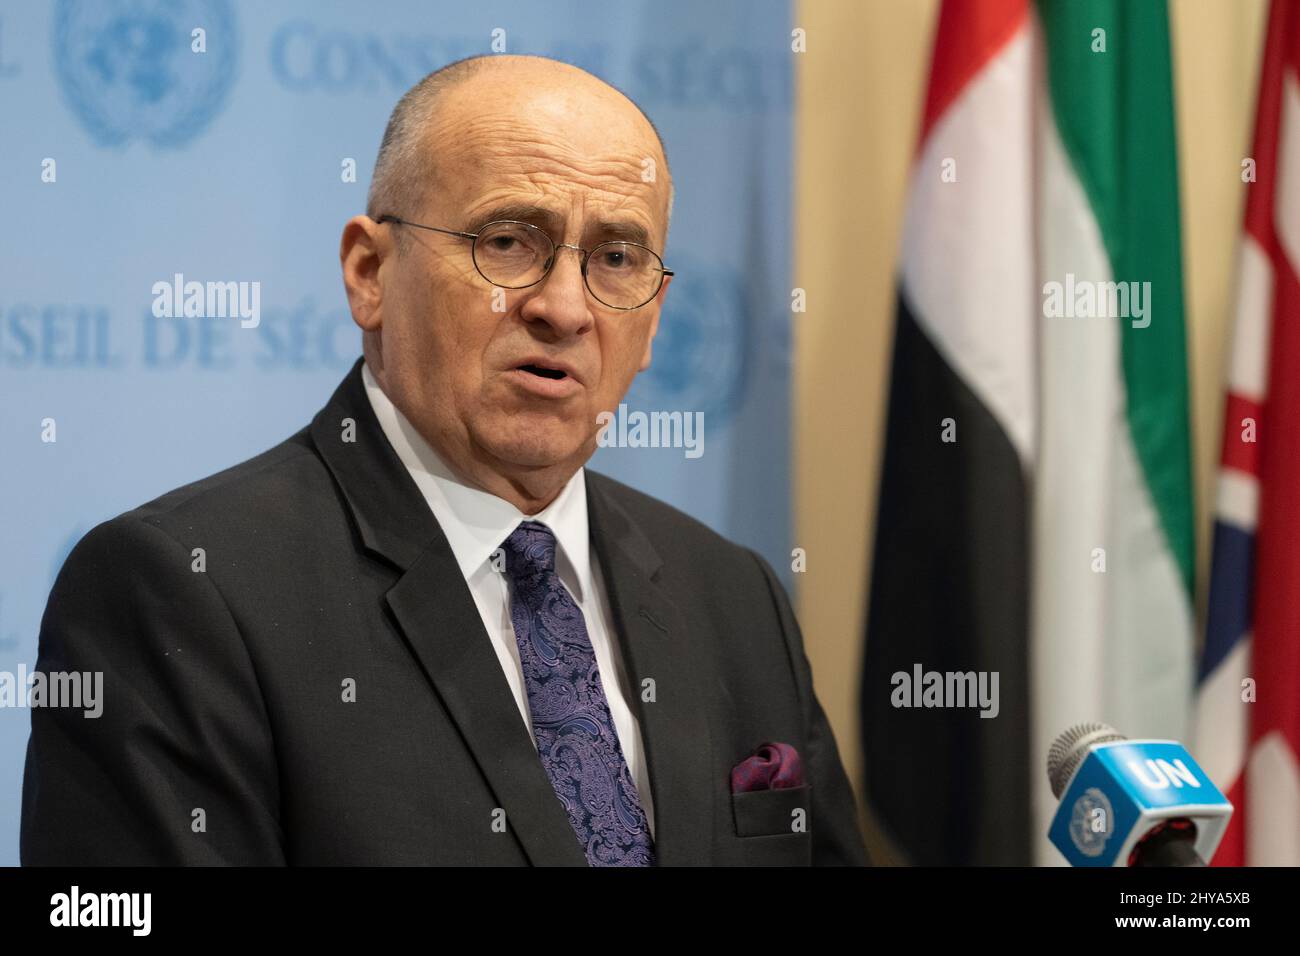 New York, NY - March 14, 2022: Zbigniew Rau, Chairperson-in-Office of the Organization for Security and Cooperation in Europe and Minister for Foreign Affairs of Poland briefs press after Security Council meeting at UN Headquarters Stock Photo